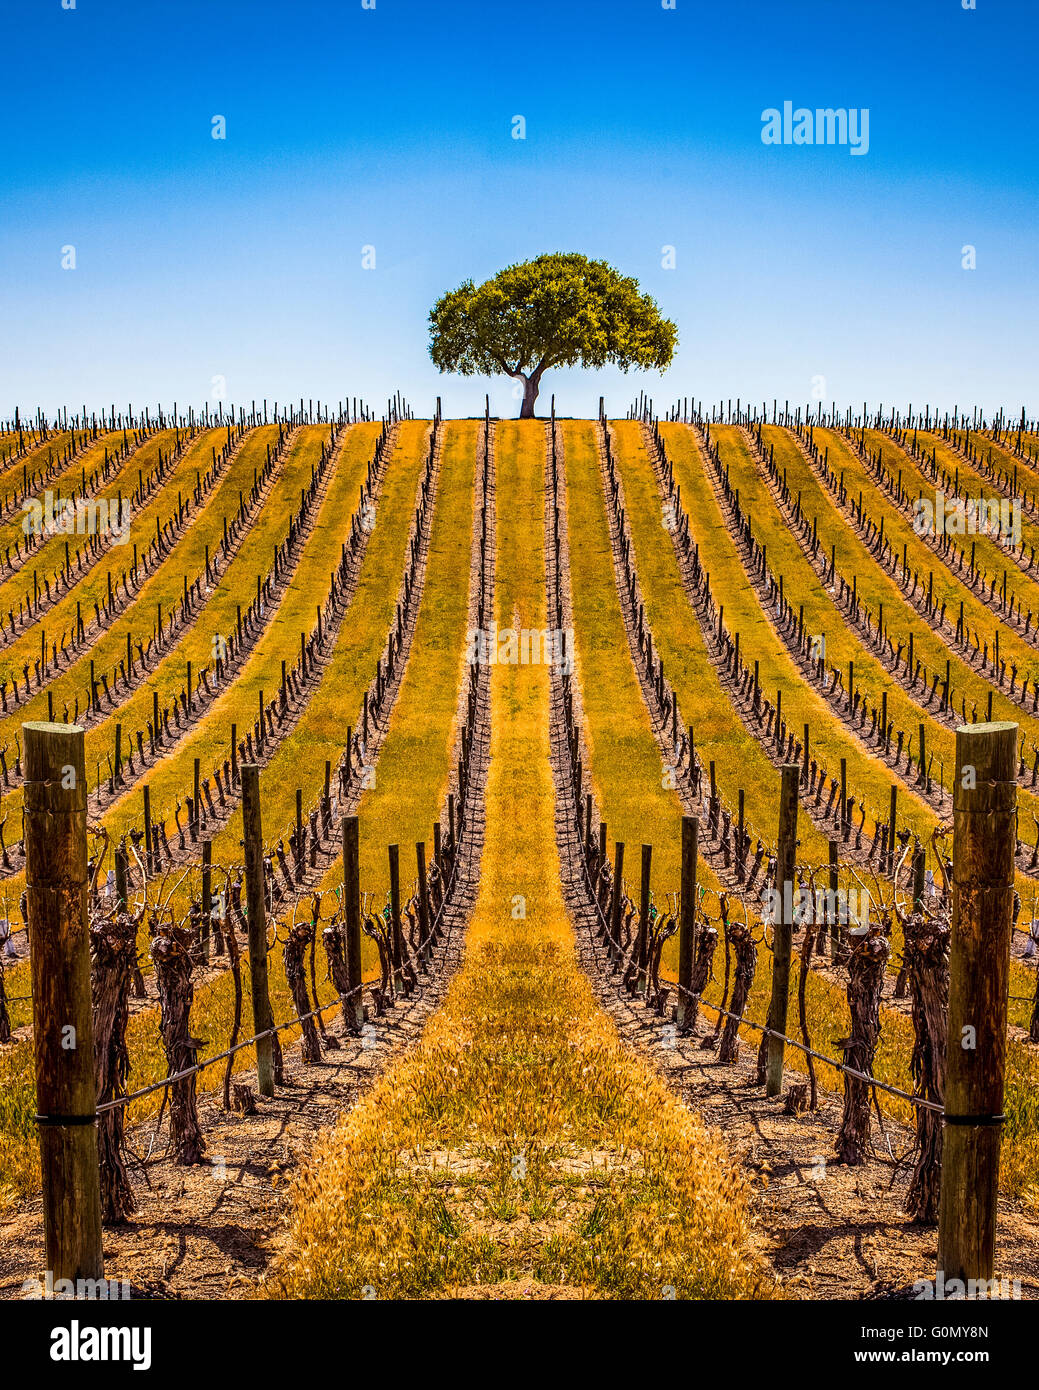 a-lone-tree-in-a-vineyard-in-paso-robles